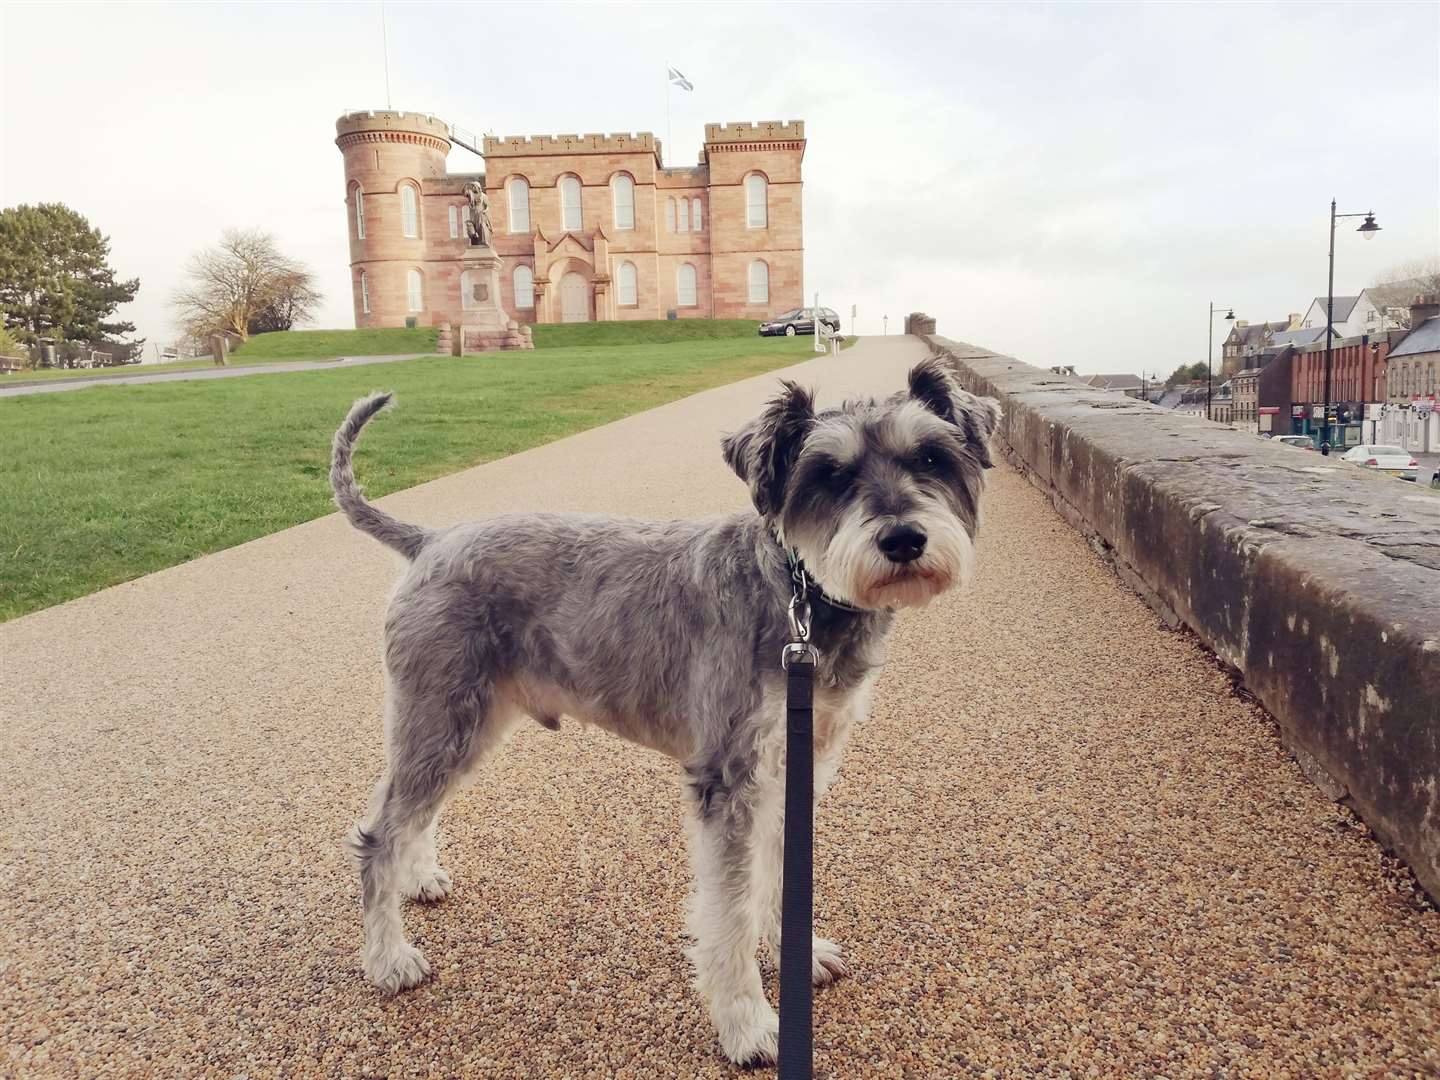 The author often walked her dog to the castle before refurbishments started.